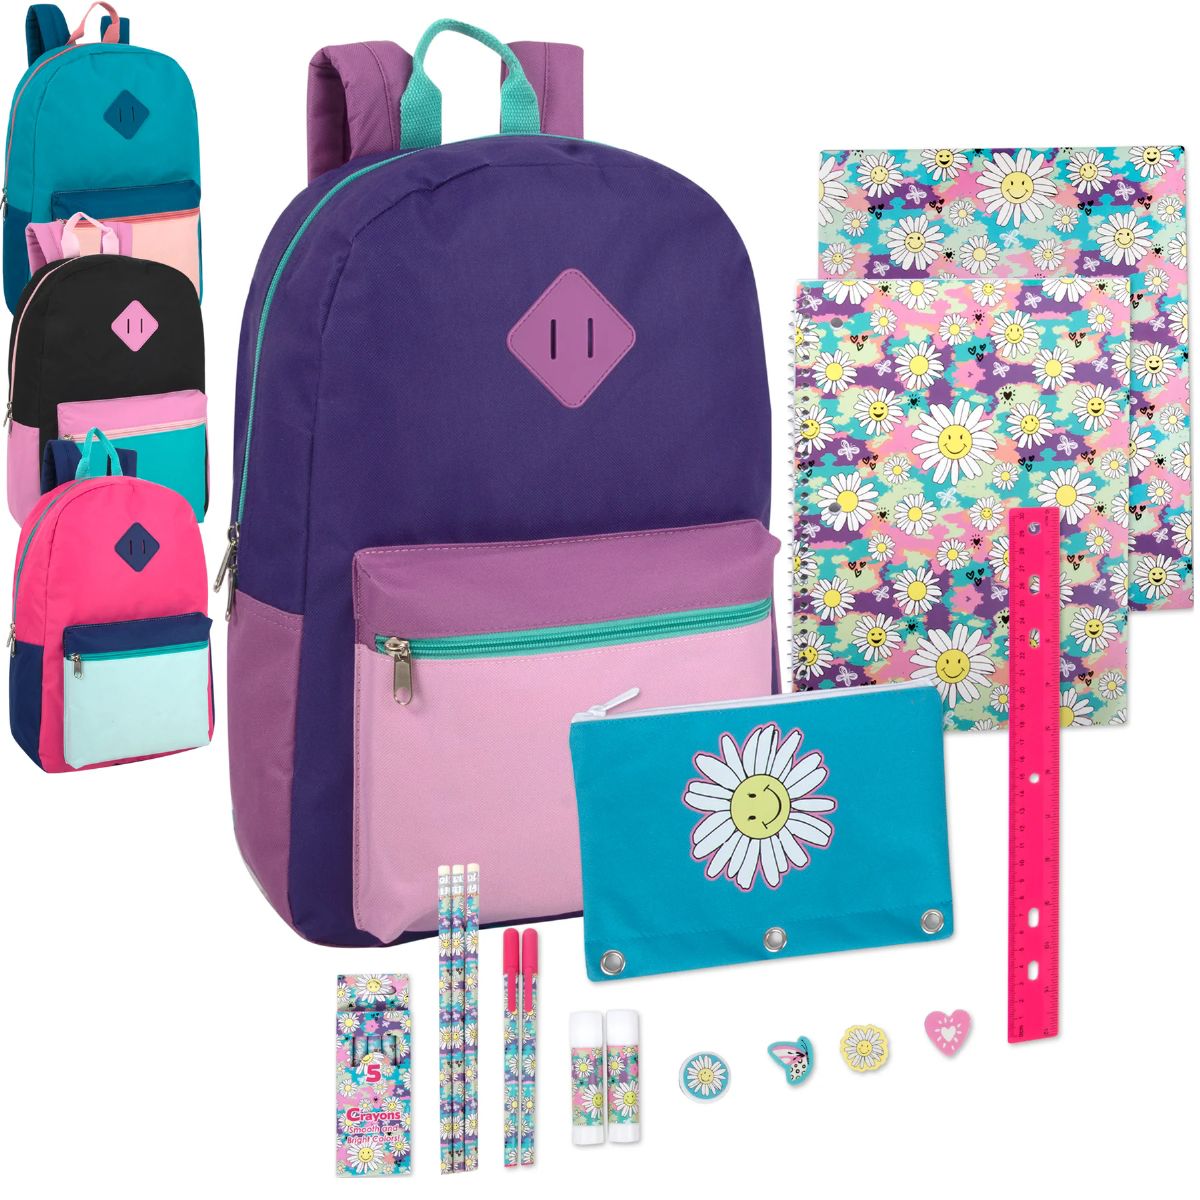 24 Pieces of 17" Multicolor Backpack With Themed 20-Piece School Supply Kit - Girls